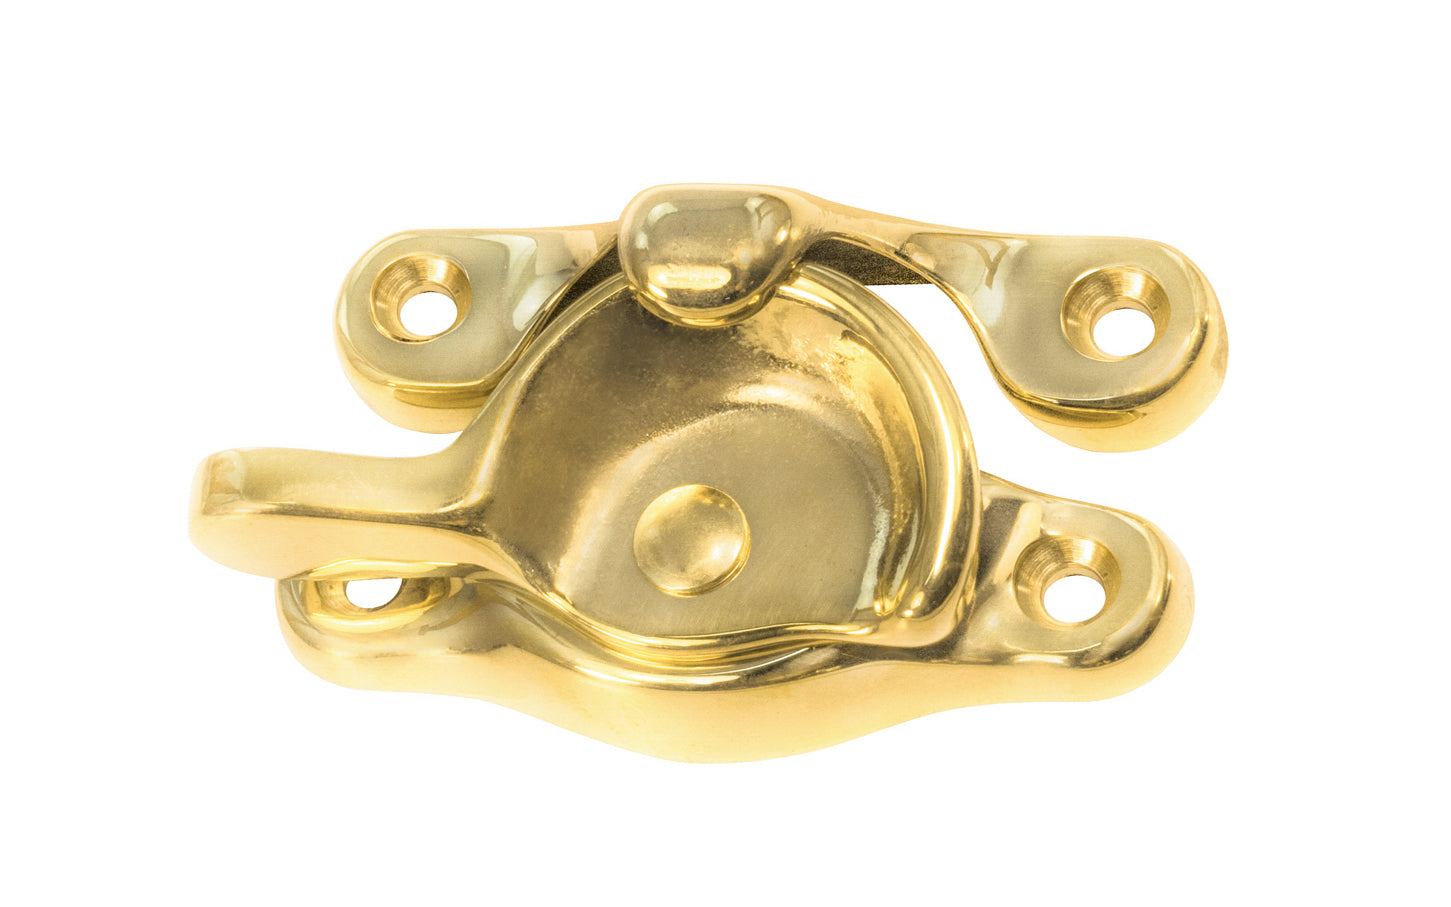 High quality & very popular classic solid brass crescent-style sash lock designed for hung or sash windows. Solid brass material with a durable pivot turn. 2-1/2" x 7/8" Regular Size Window Lock. Lacquered Brass Finish.